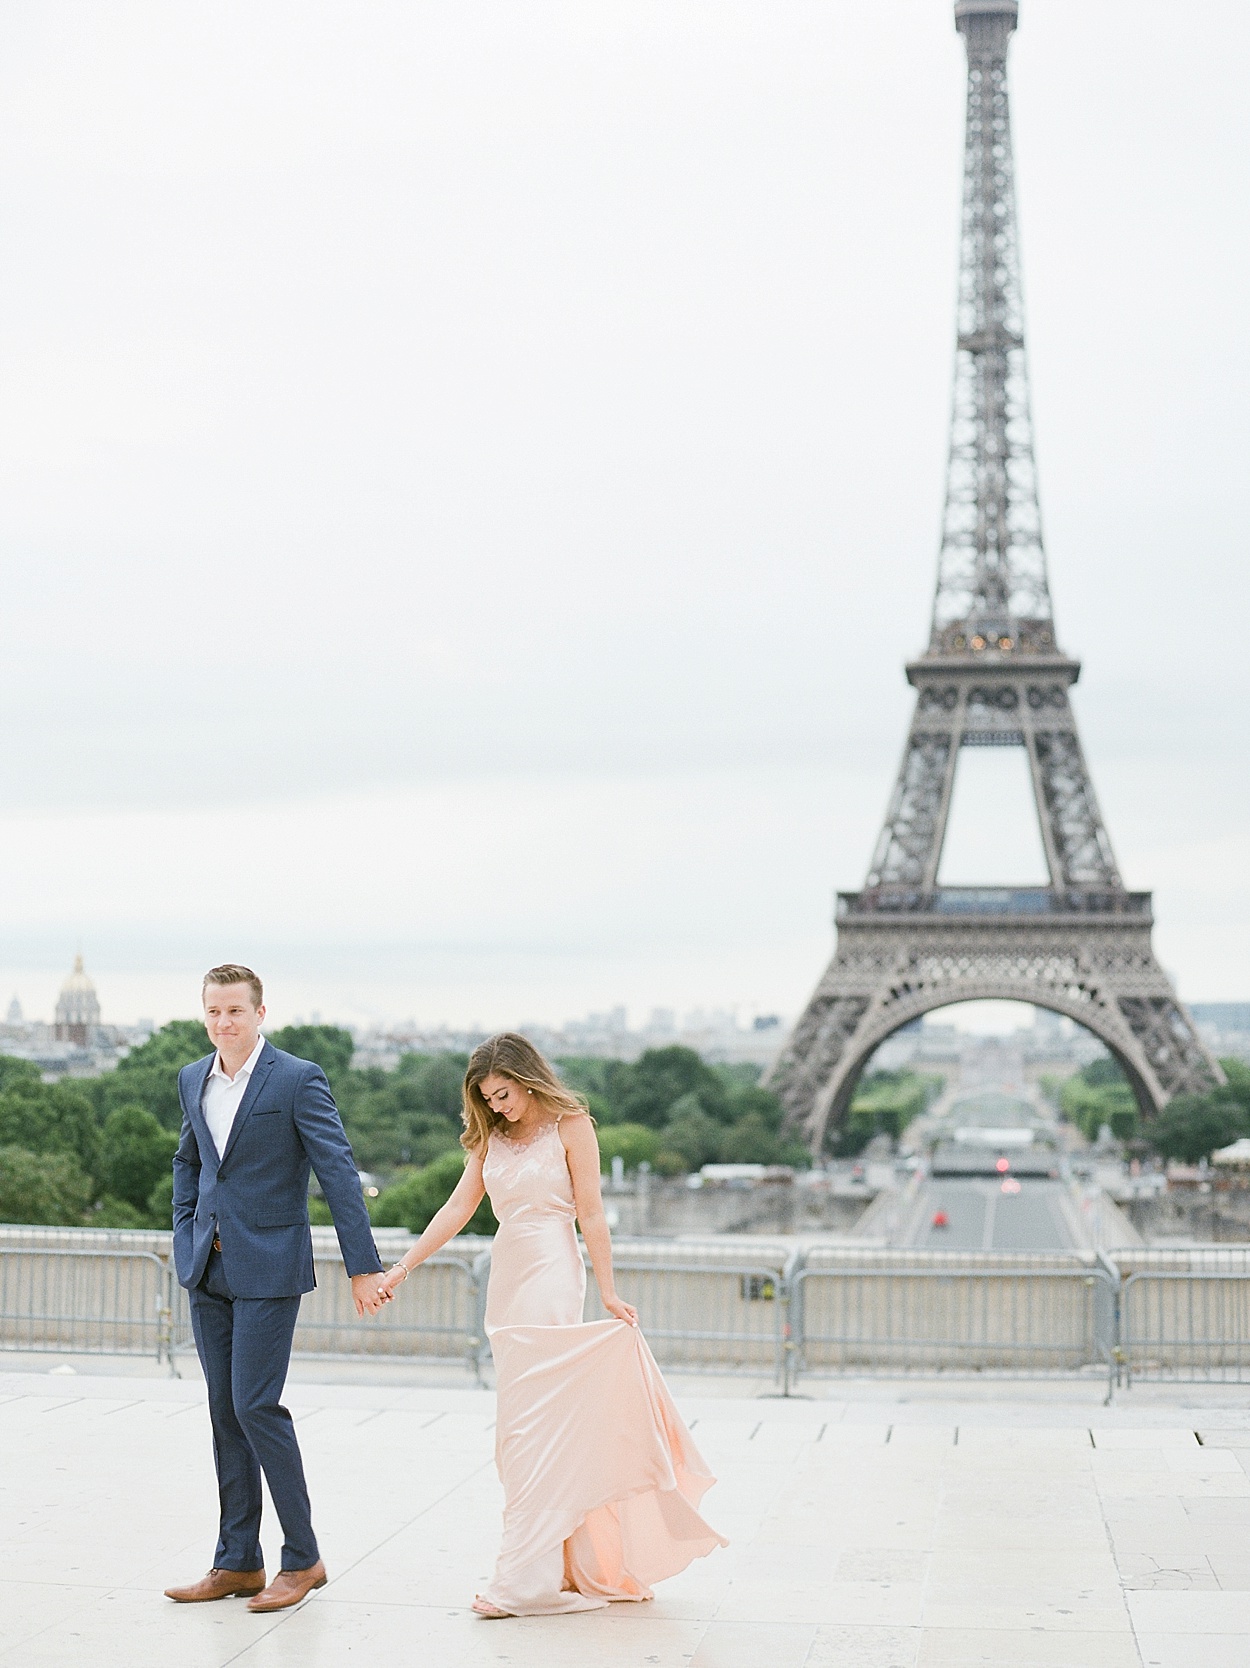 Sunrise portraits at the Eiffel Tower in Paris, France | Abby Grace Photography